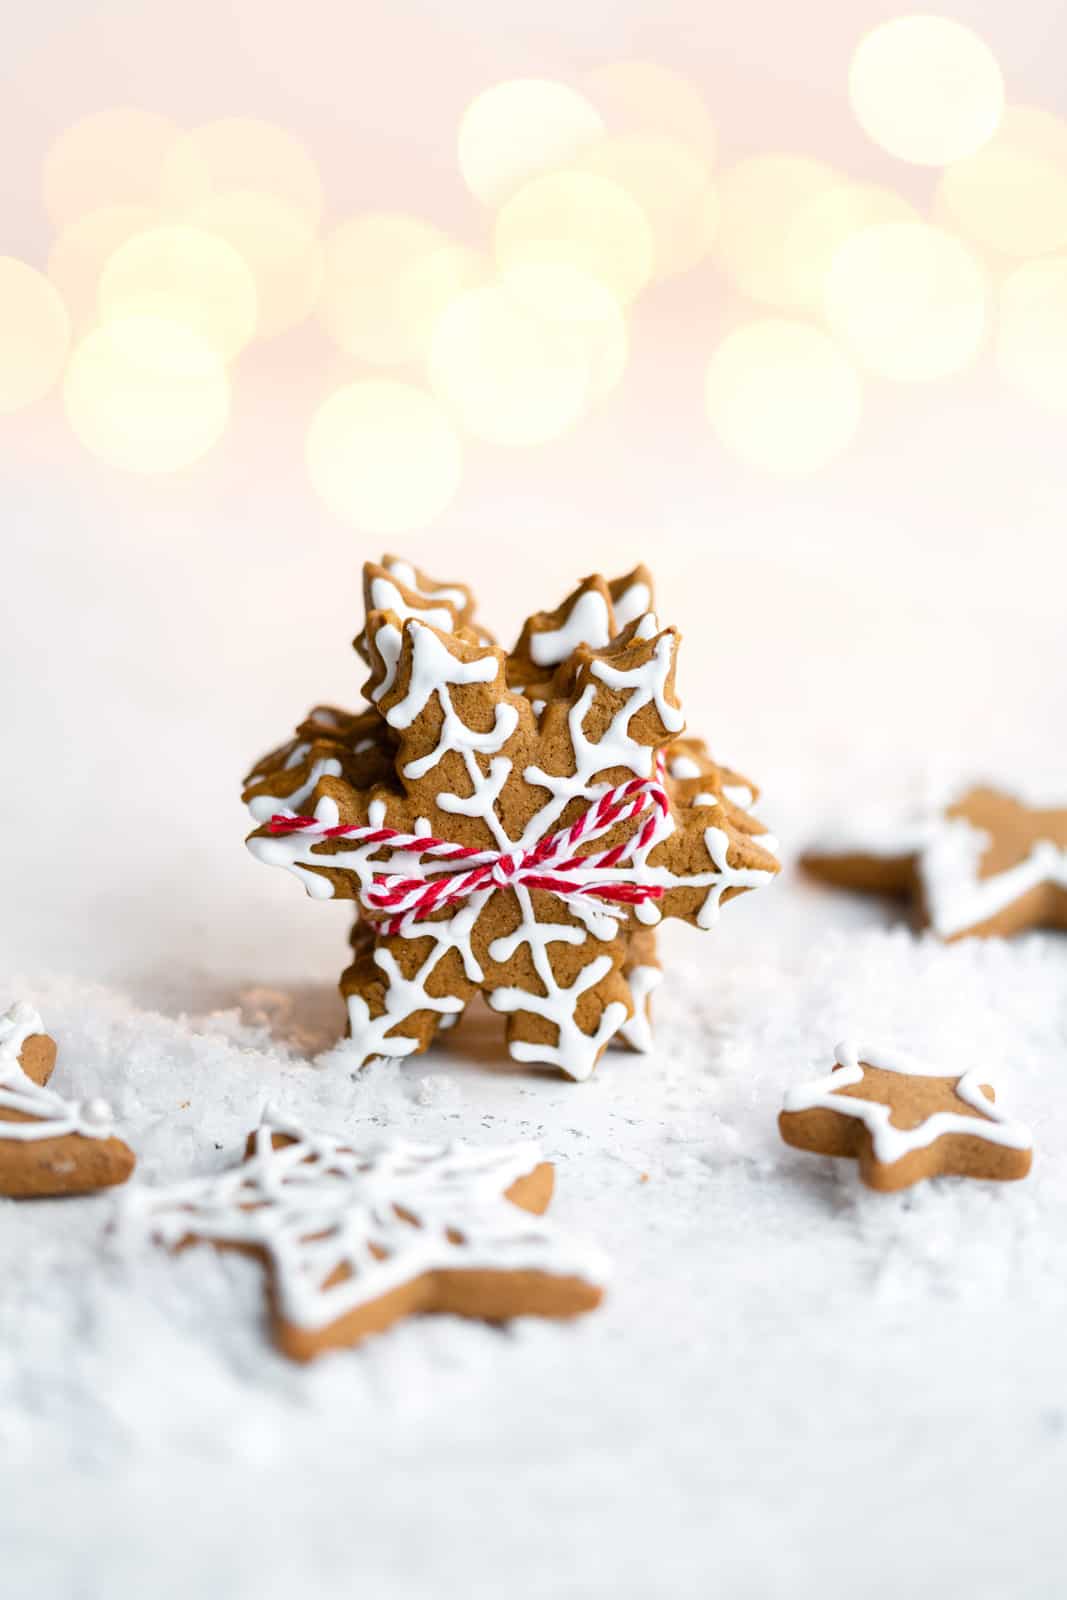 Vegan gingerbread cookies shaped like snowflakes with white icing decoration 